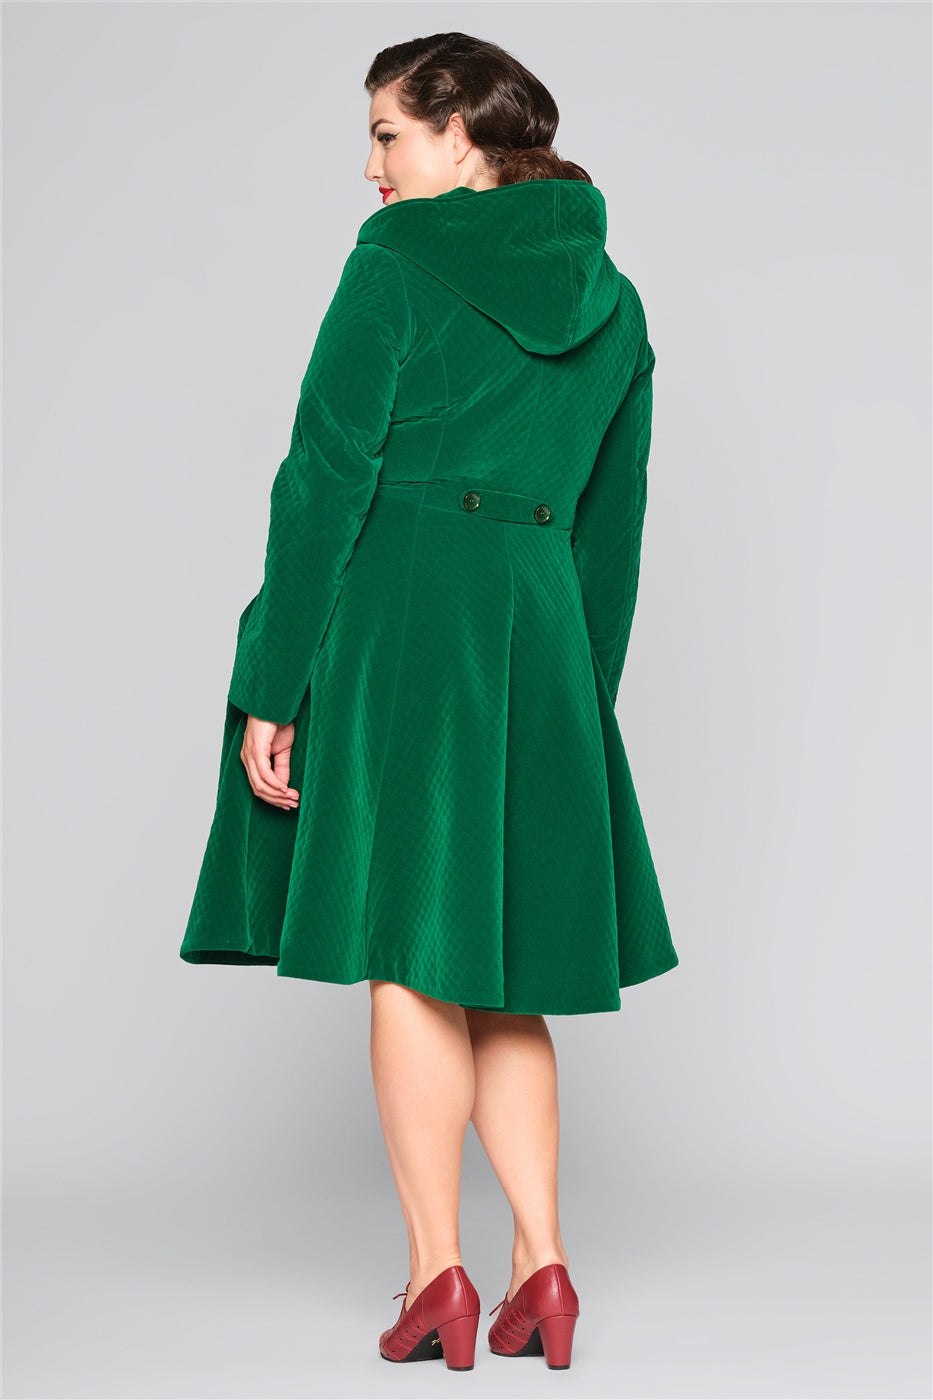 Heather Quilted Velvet Green Swing Coat by